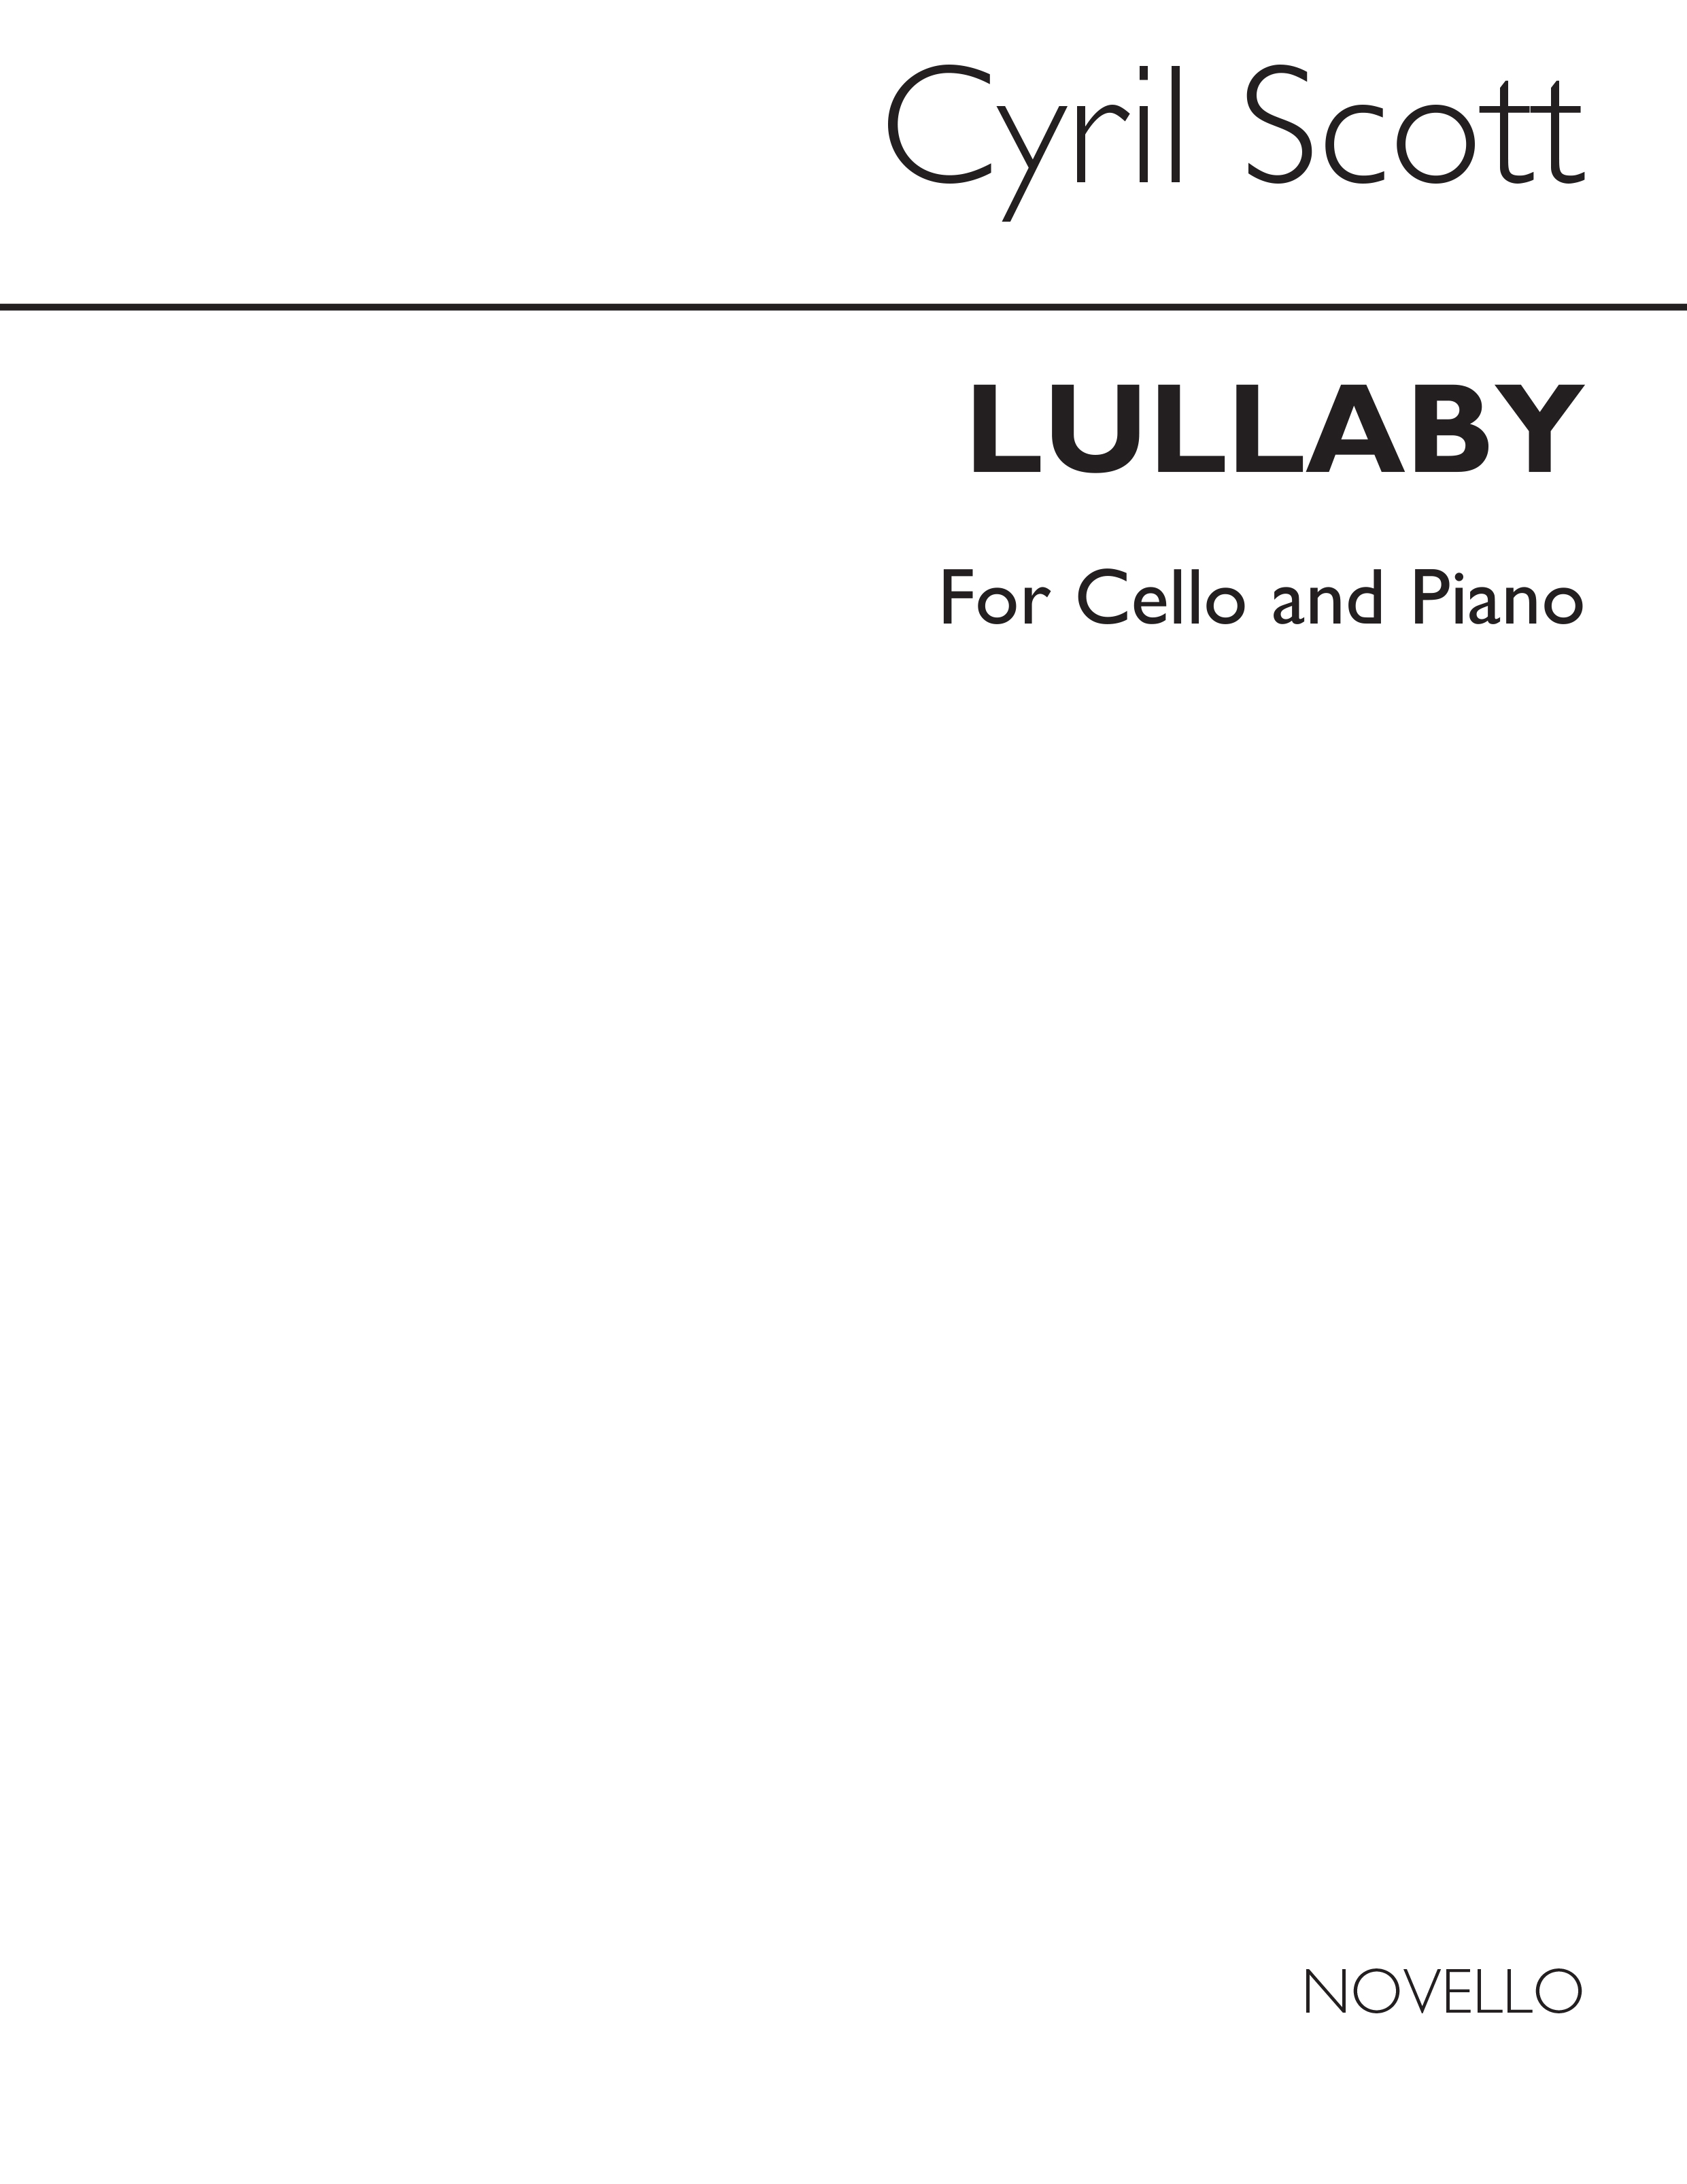 Cyril Scott: Lullaby Op.57 No.2 for Cello and Piano: Cello: Instrumental Work